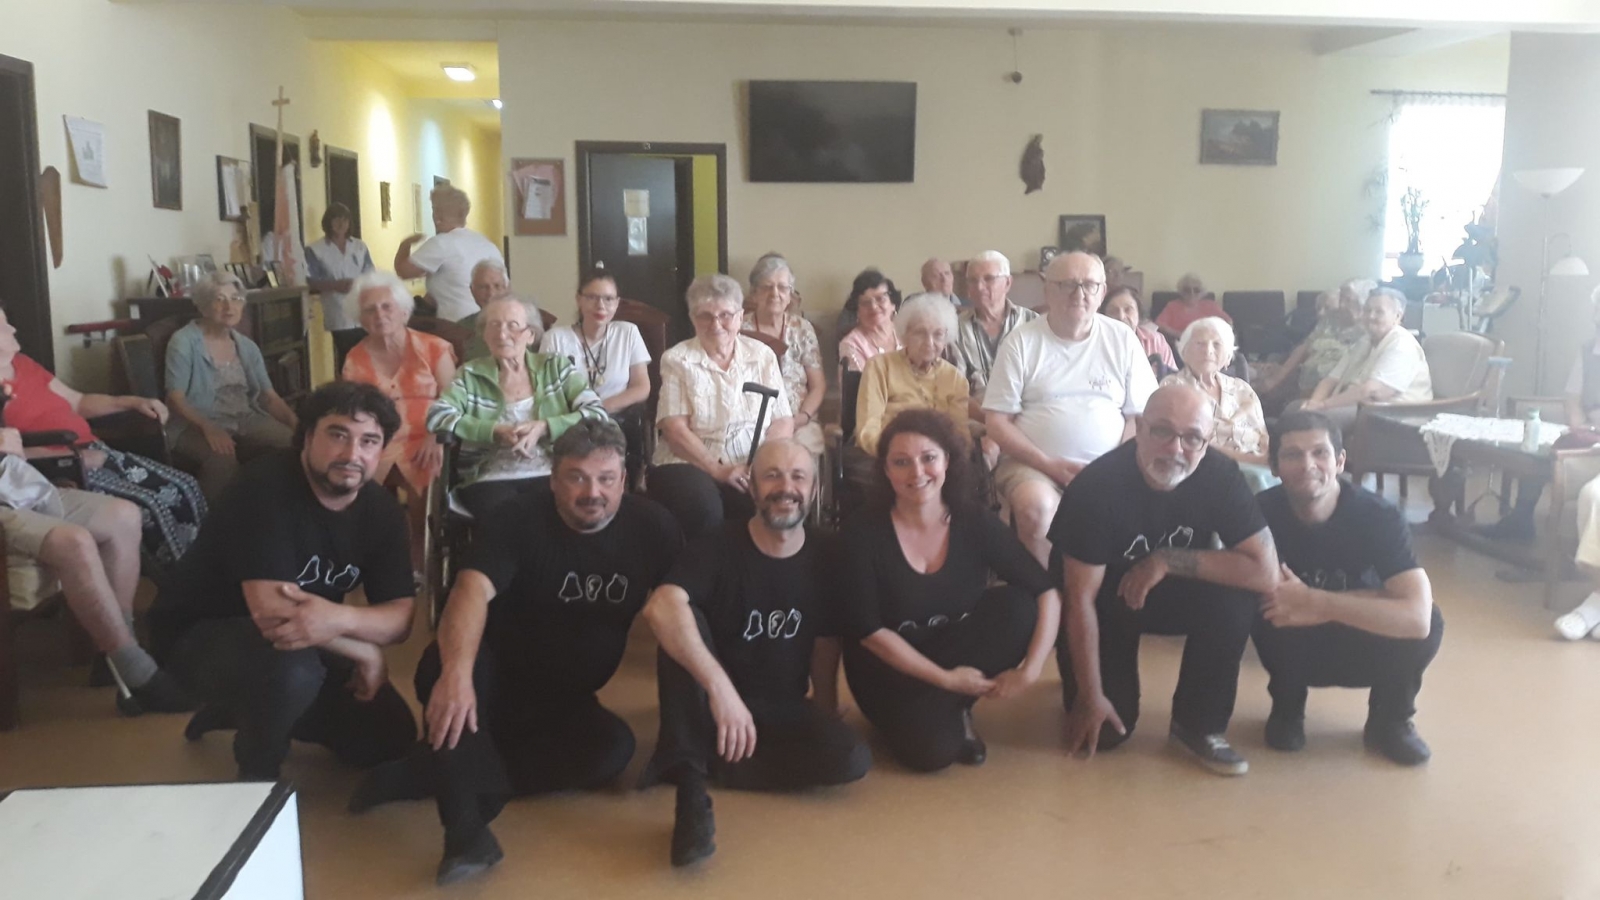 Theatre performance in the elderly home